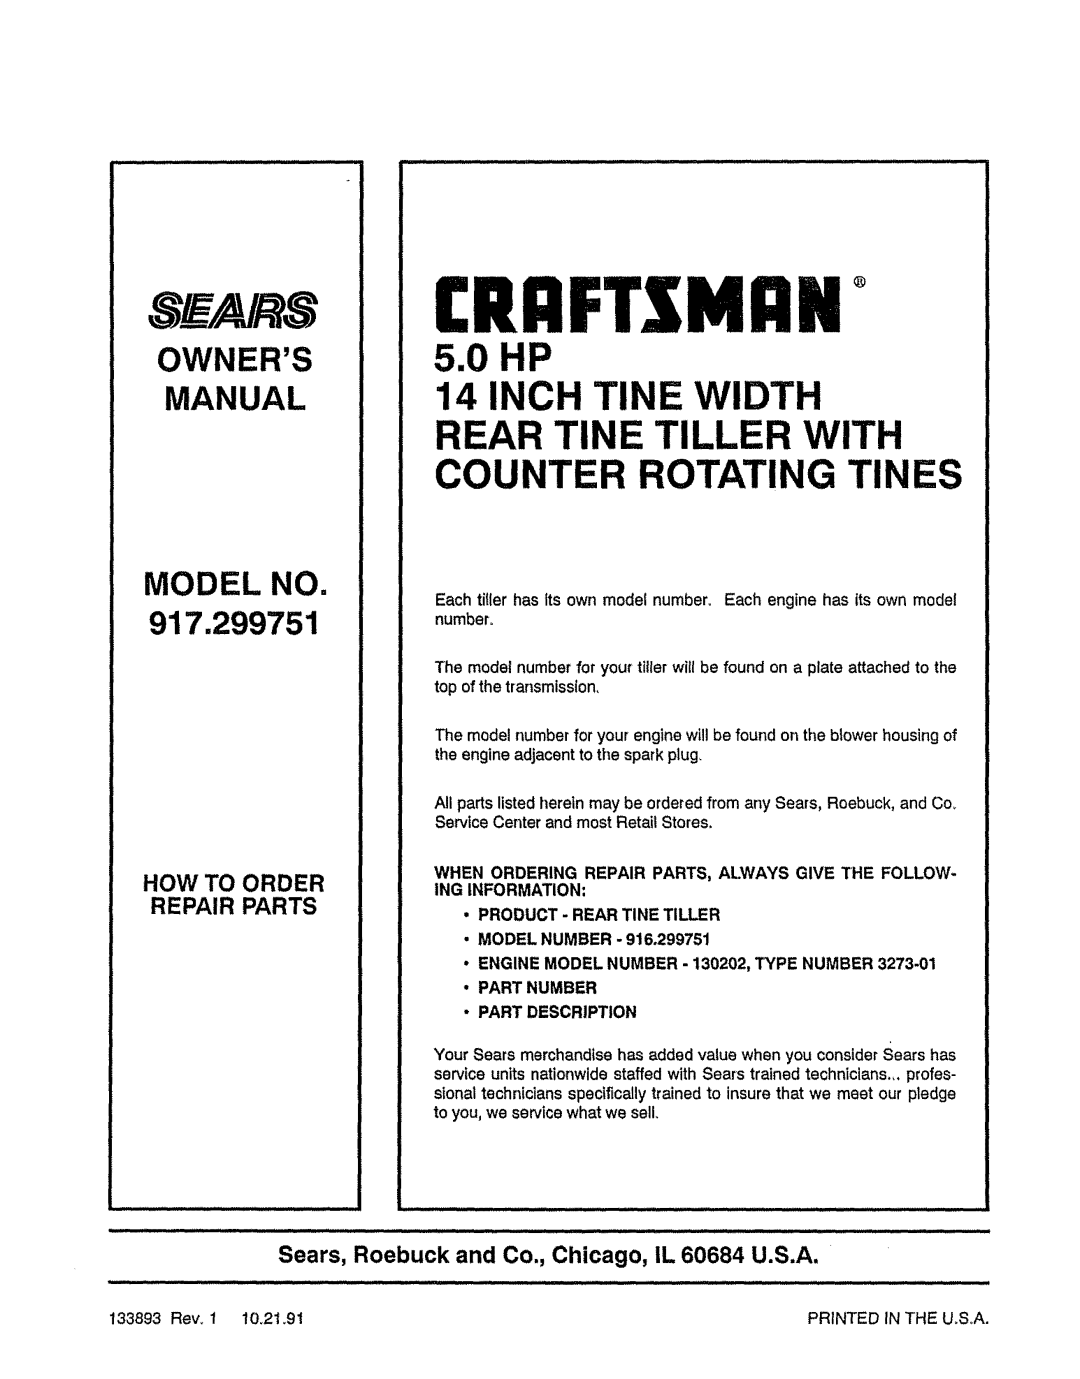 Craftsman 917-299751 5.0 HP, How To Order Repair Parts, Rrftxmrn, S A/k S, Sears, Roebuck and Co., Chicago, IL 60684 U.S.A 